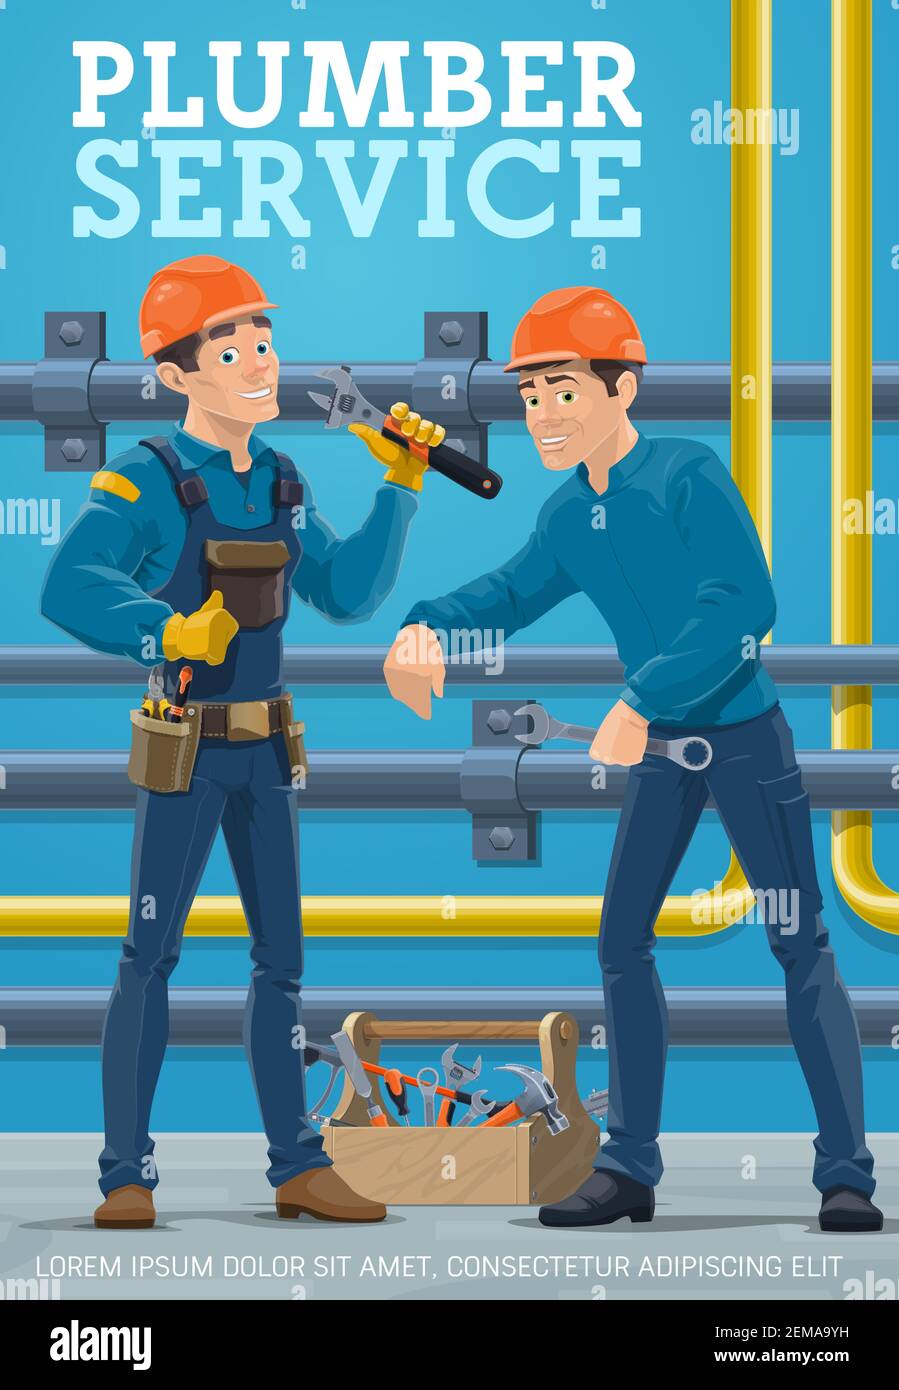 Plumber service, pipes repair and maintenance vector poster. Plumber workers with tools and toolbox repairing leakage of water, heating or gas supply Stock Vector